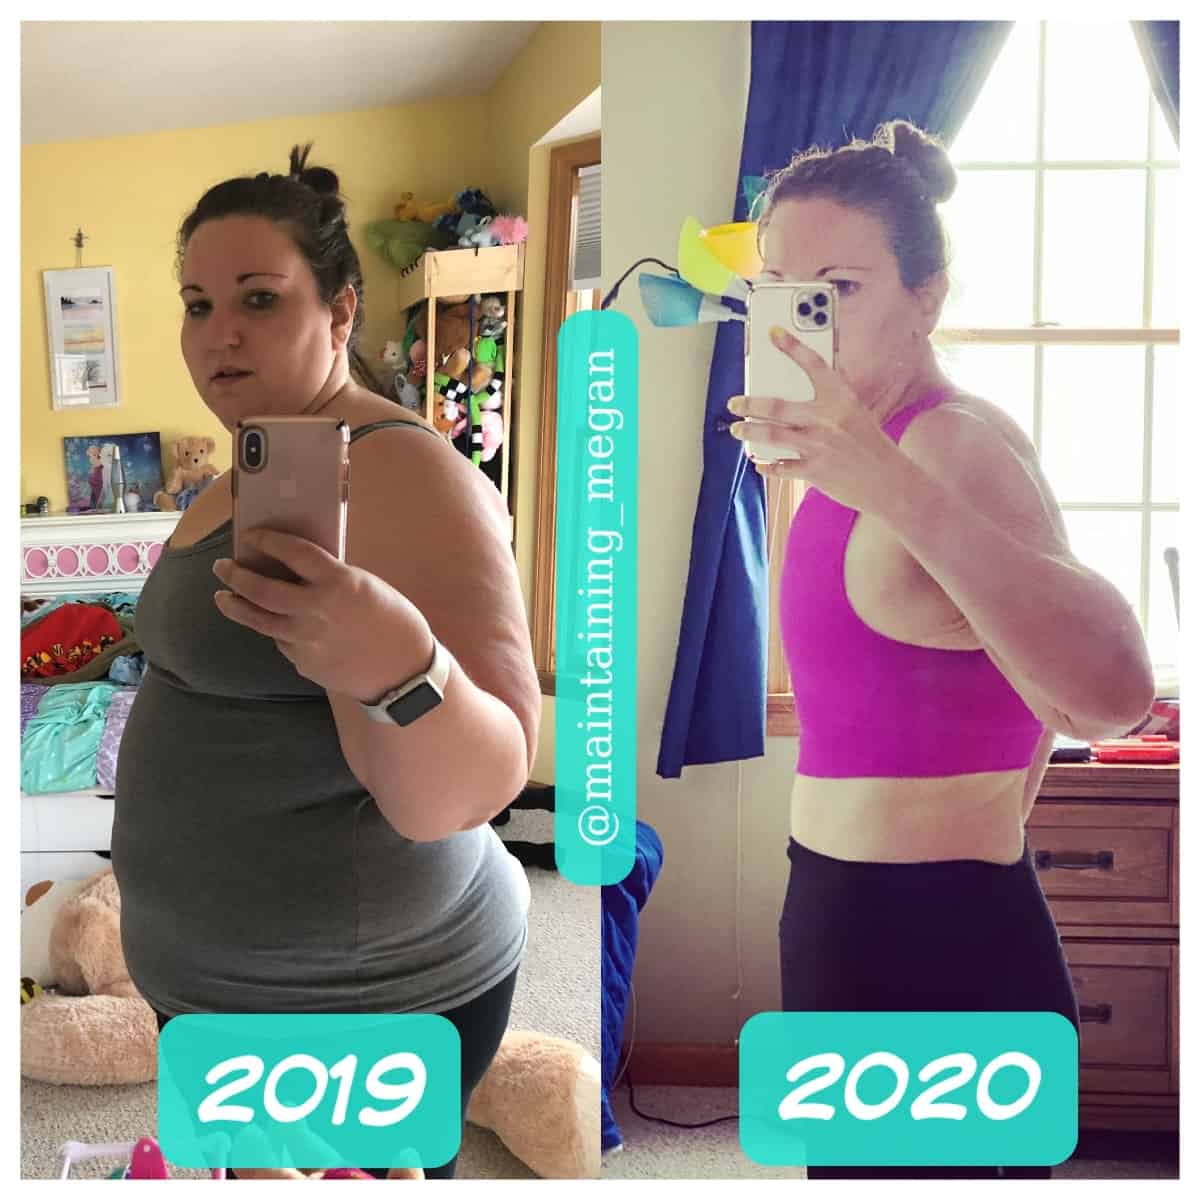 Megan C. shows off her weight loss success before and after